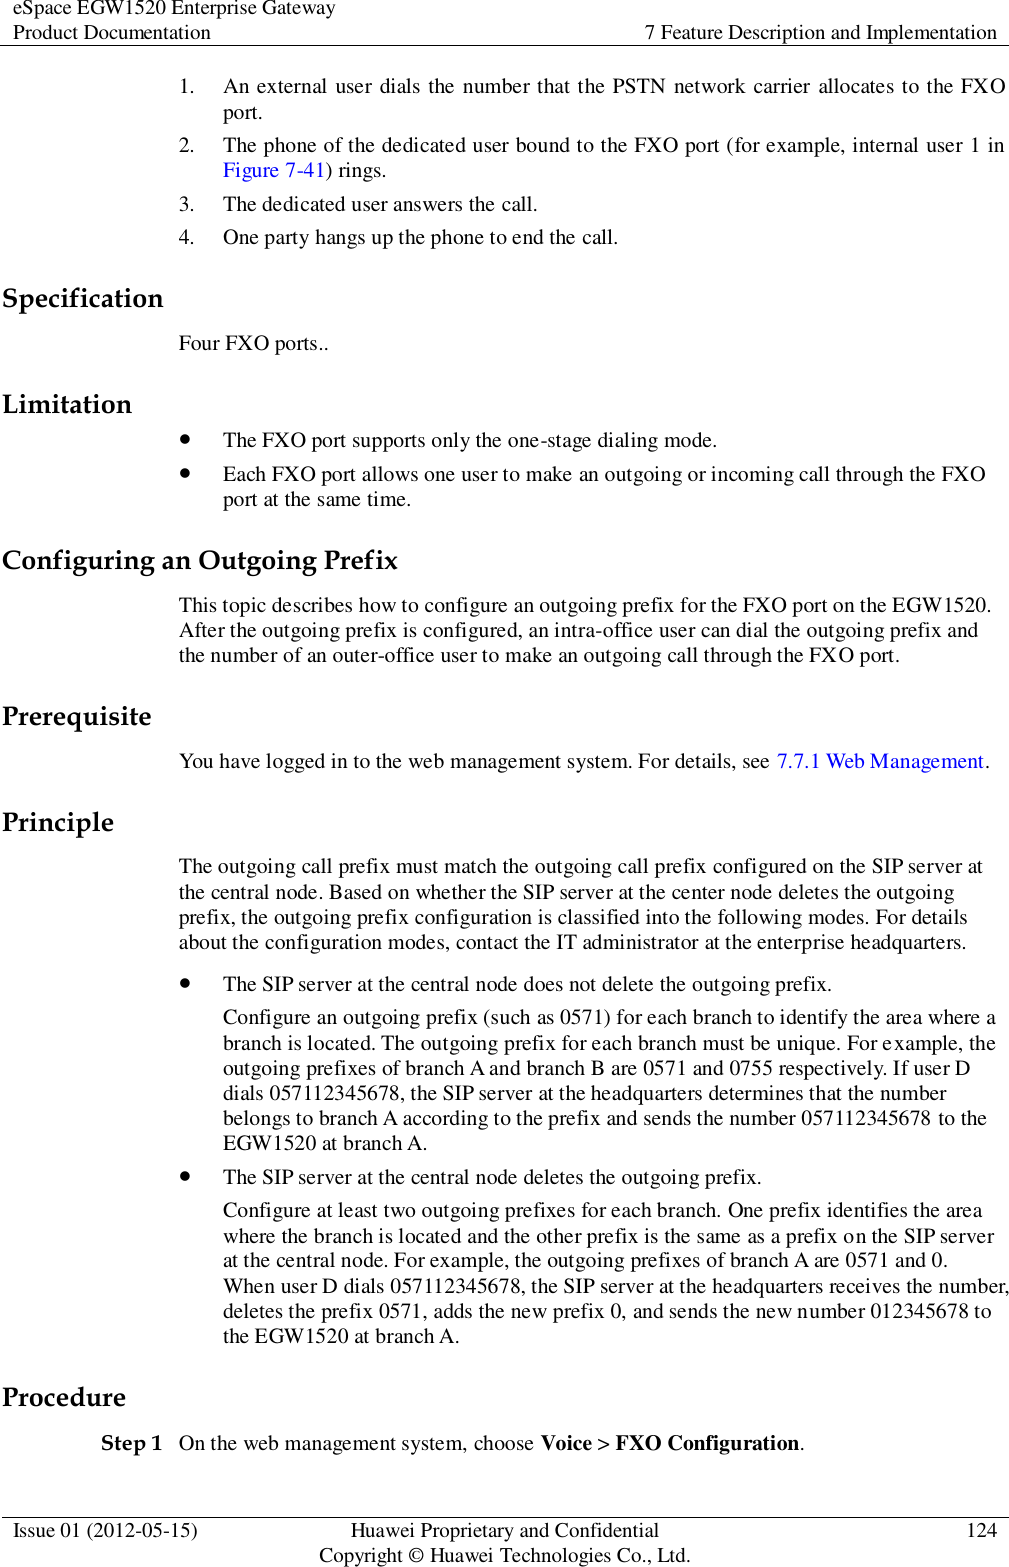 eSpace EGW1520 Enterprise Gateway Product Documentation 7 Feature Description and Implementation  Issue 01 (2012-05-15) Huawei Proprietary and Confidential                                     Copyright © Huawei Technologies Co., Ltd. 124  1. An external user dials the number that the PSTN network carrier allocates to the FXO port. 2. The phone of the dedicated user bound to the FXO port (for example, internal user 1 in Figure 7-41) rings. 3. The dedicated user answers the call. 4. One party hangs up the phone to end the call. Specification Four FXO ports.. Limitation  The FXO port supports only the one-stage dialing mode.  Each FXO port allows one user to make an outgoing or incoming call through the FXO port at the same time. Configuring an Outgoing Prefix This topic describes how to configure an outgoing prefix for the FXO port on the EGW1520. After the outgoing prefix is configured, an intra-office user can dial the outgoing prefix and the number of an outer-office user to make an outgoing call through the FXO port. Prerequisite You have logged in to the web management system. For details, see 7.7.1 Web Management. Principle The outgoing call prefix must match the outgoing call prefix configured on the SIP server at the central node. Based on whether the SIP server at the center node deletes the outgoing prefix, the outgoing prefix configuration is classified into the following modes. For details about the configuration modes, contact the IT administrator at the enterprise headquarters.  The SIP server at the central node does not delete the outgoing prefix. Configure an outgoing prefix (such as 0571) for each branch to identify the area where a branch is located. The outgoing prefix for each branch must be unique. For example, the outgoing prefixes of branch A and branch B are 0571 and 0755 respectively. If user D dials 057112345678, the SIP server at the headquarters determines that the number belongs to branch A according to the prefix and sends the number 057112345678 to the EGW1520 at branch A.  The SIP server at the central node deletes the outgoing prefix. Configure at least two outgoing prefixes for each branch. One prefix identifies the area where the branch is located and the other prefix is the same as a prefix on the SIP server at the central node. For example, the outgoing prefixes of branch A are 0571 and 0. When user D dials 057112345678, the SIP server at the headquarters receives the number, deletes the prefix 0571, adds the new prefix 0, and sends the new number 012345678 to the EGW1520 at branch A. Procedure Step 1 On the web management system, choose Voice &gt; FXO Configuration. 